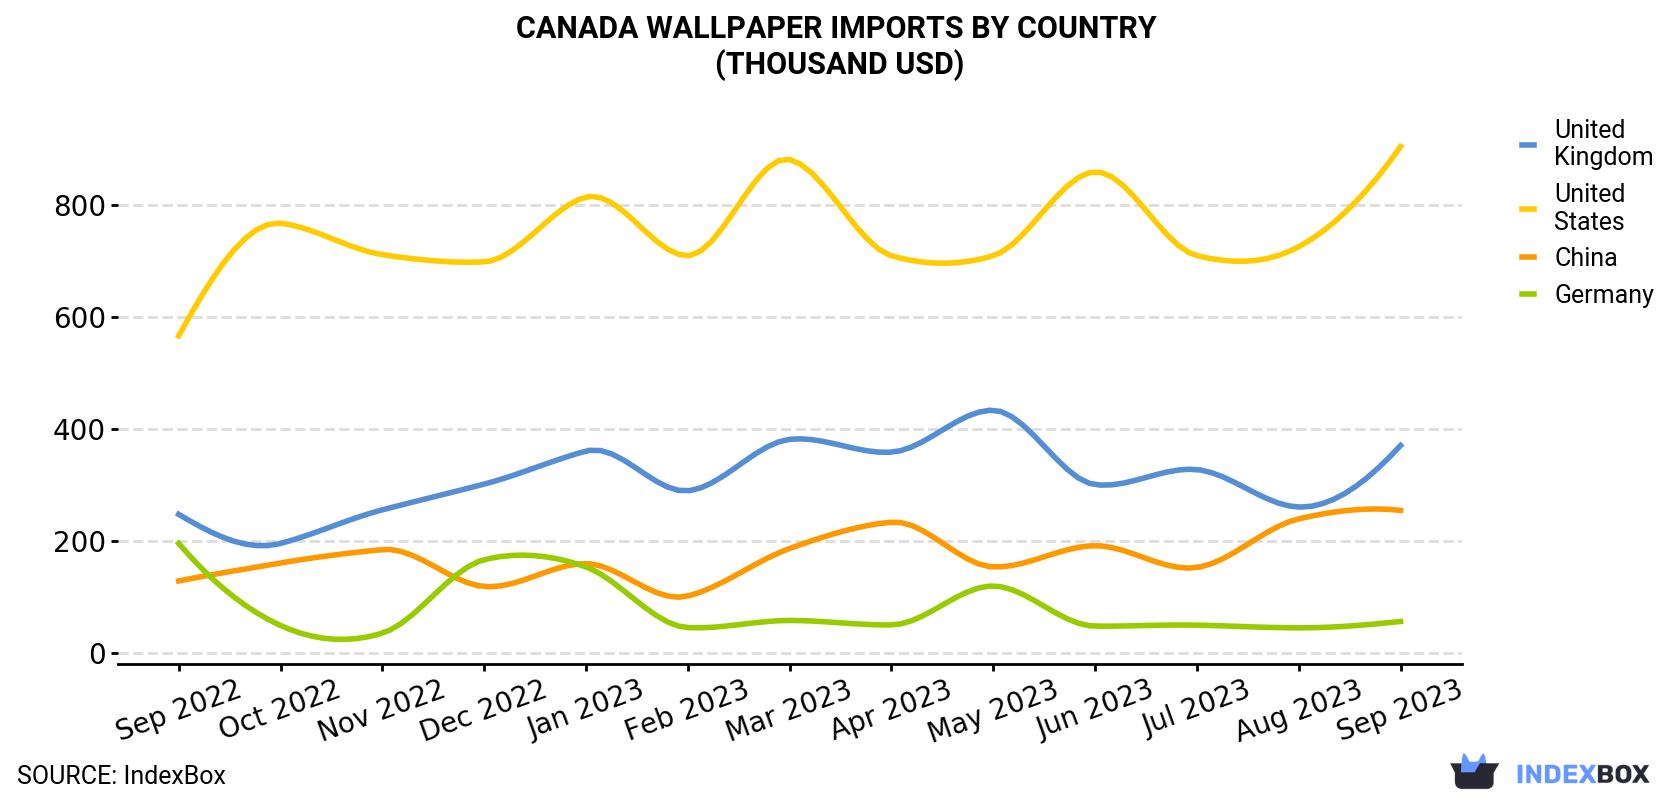 Canada Wallpaper Imports By Country (Thousand USD)